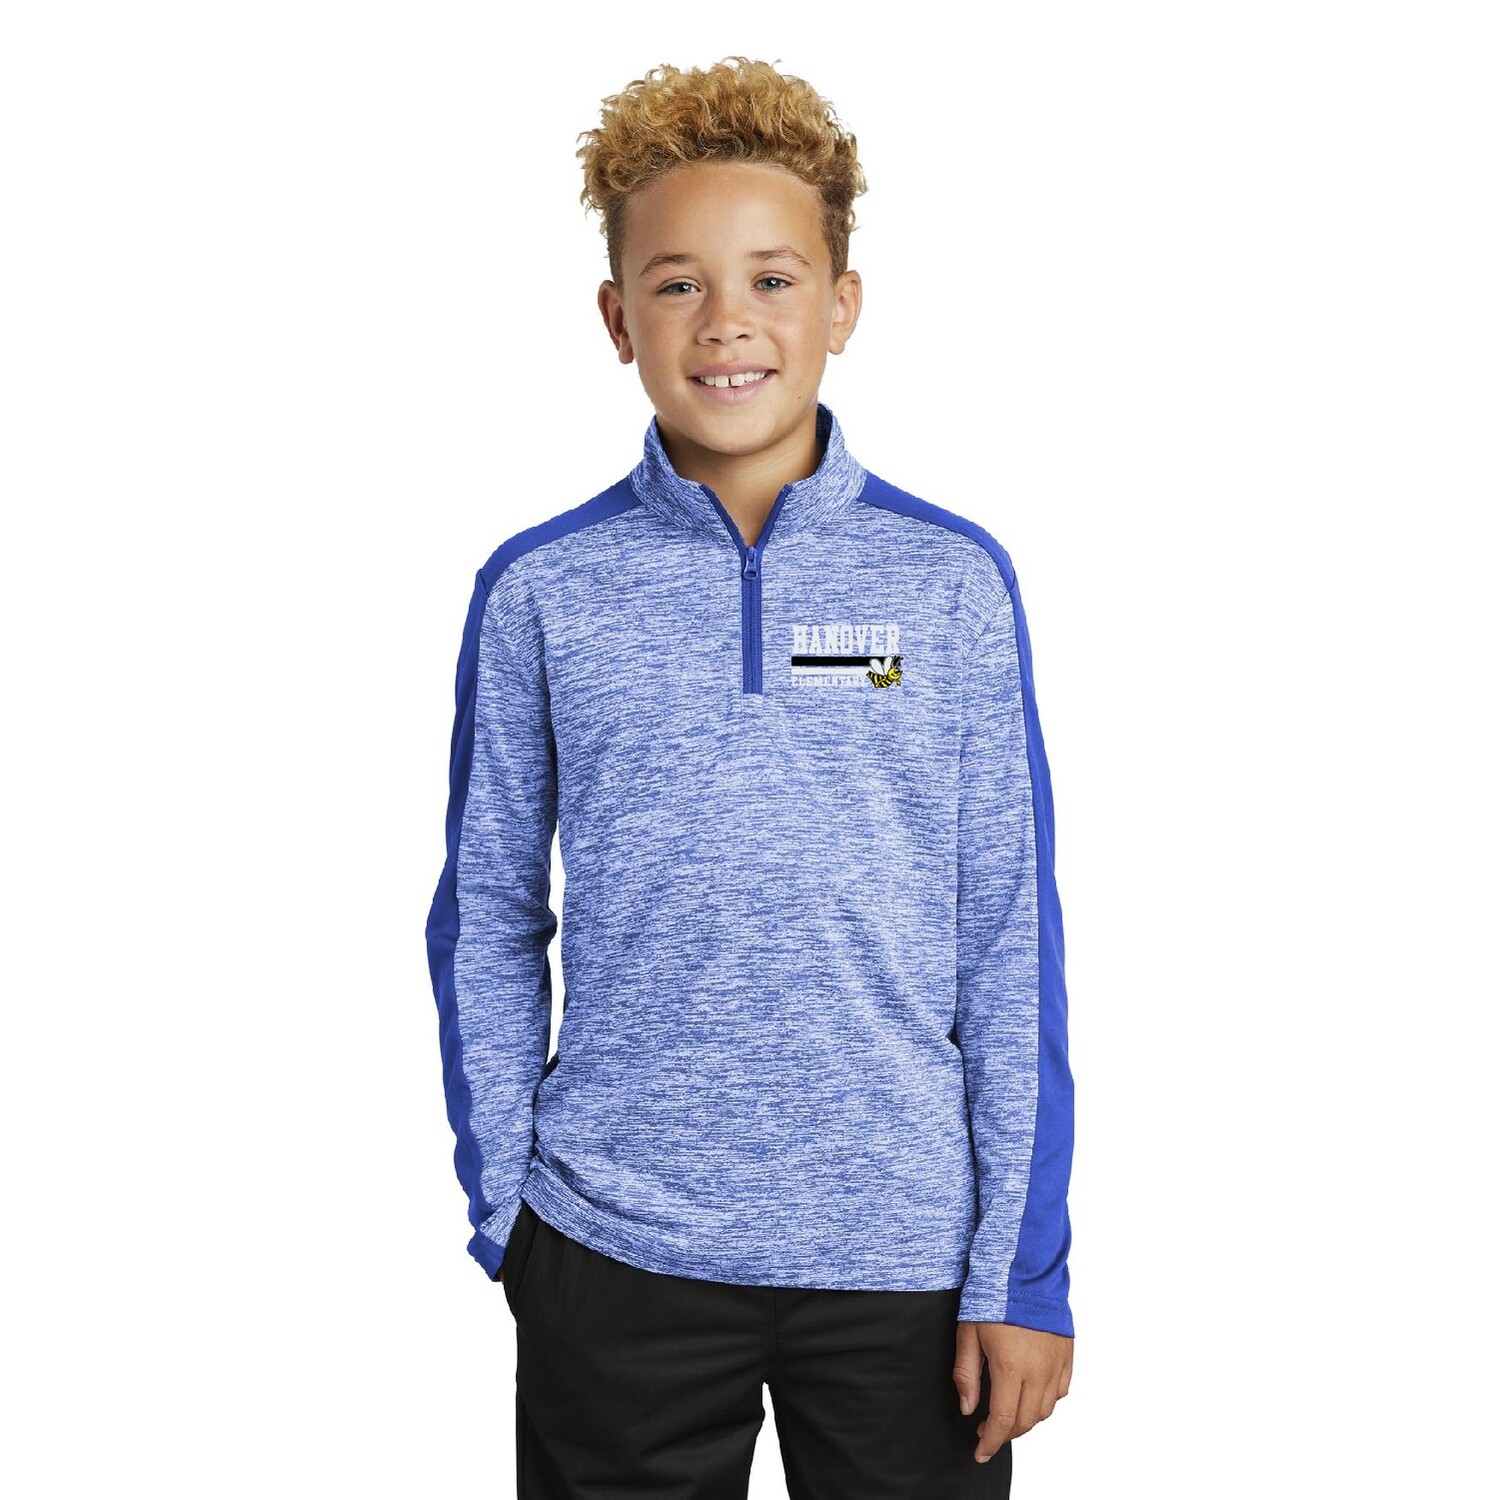 Hanover Elementary Sport-Tek Youth PosiCharge Electric Heather Lightweight 1/4-Zip Pullover - YST397 - True Royal Electric/True Royal